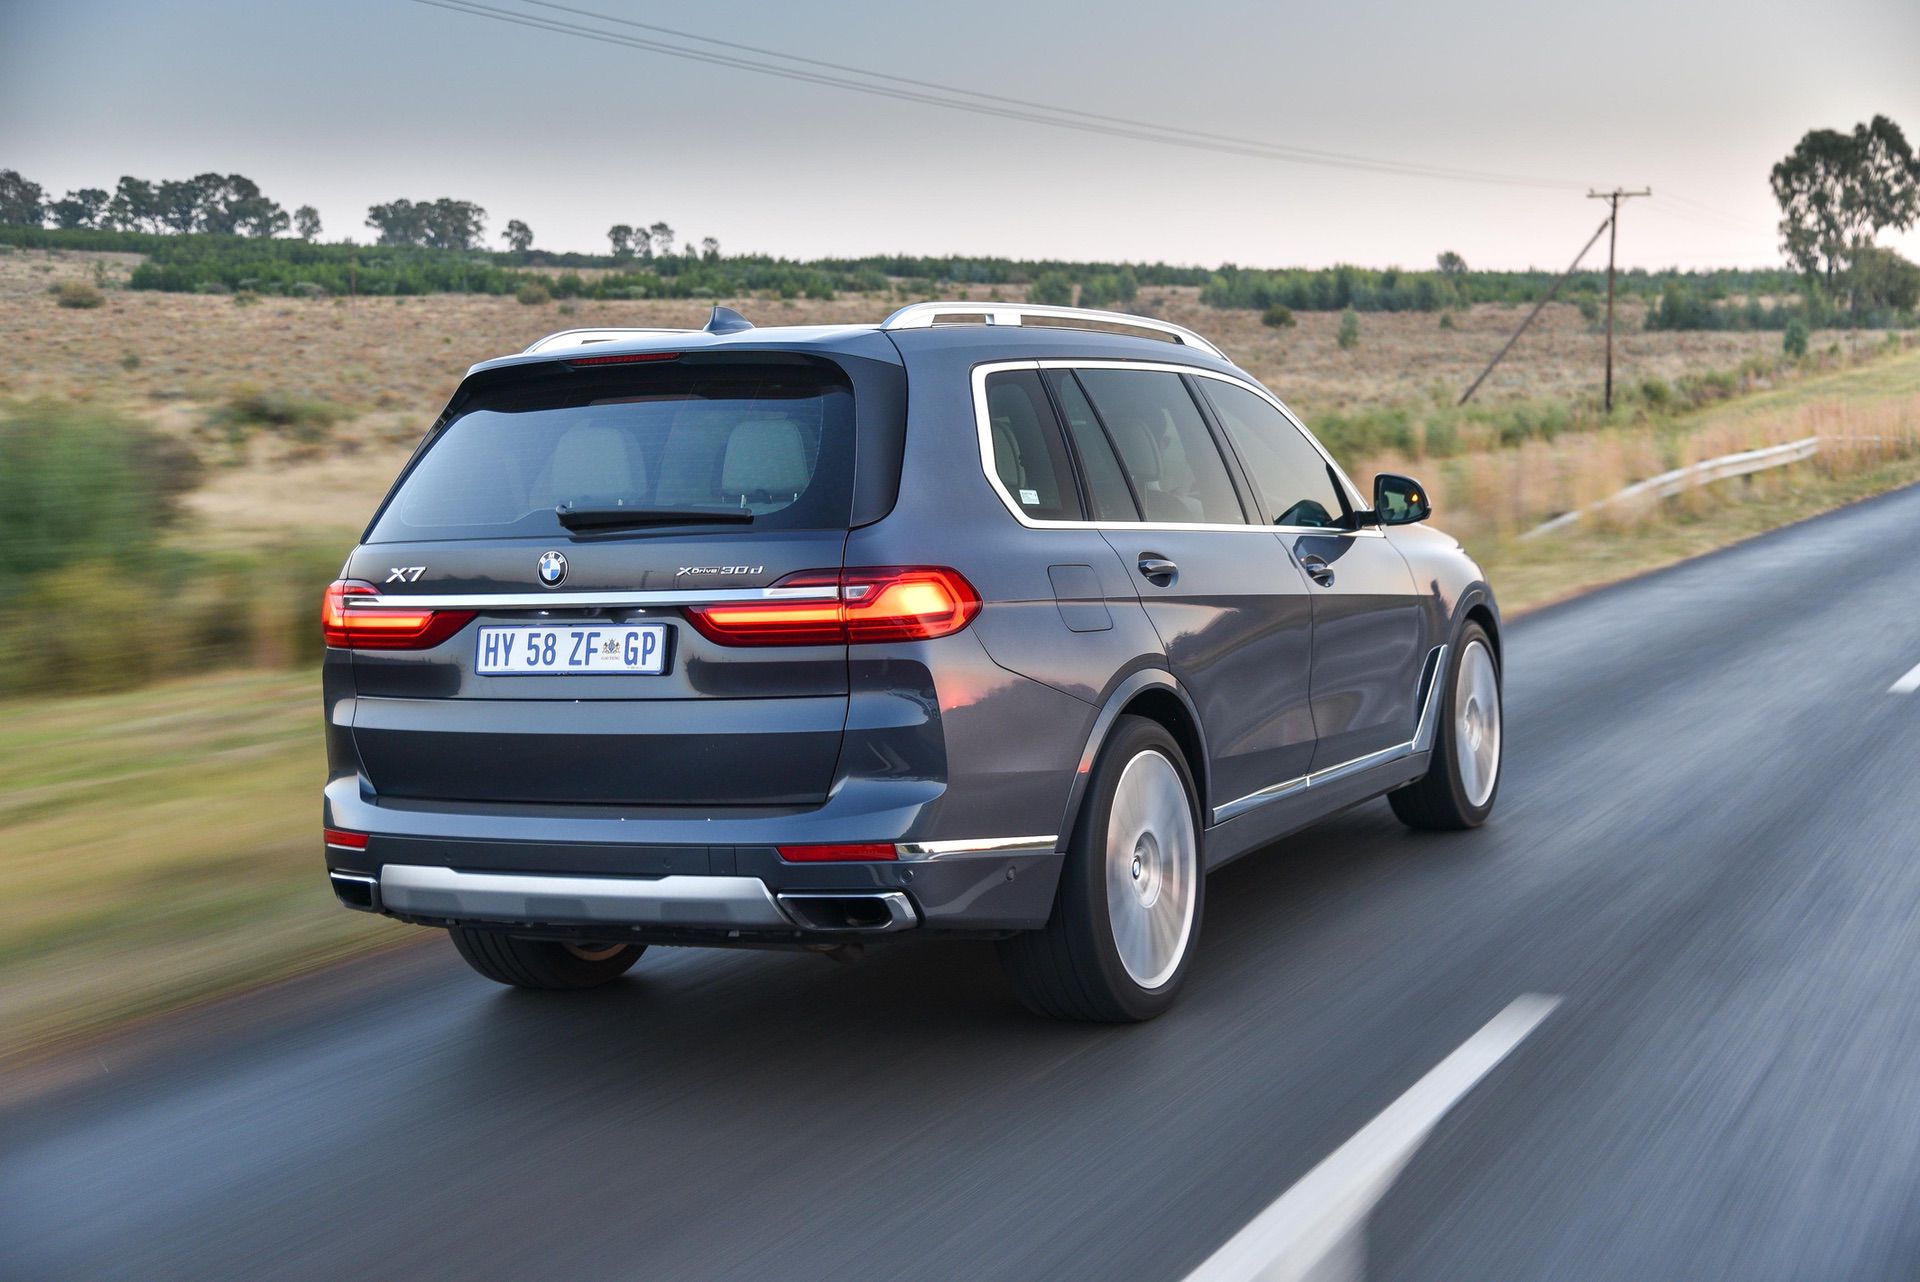 VIDEO REVIEW: BMW X7 xDrive50i -- Better Than a 7 Series